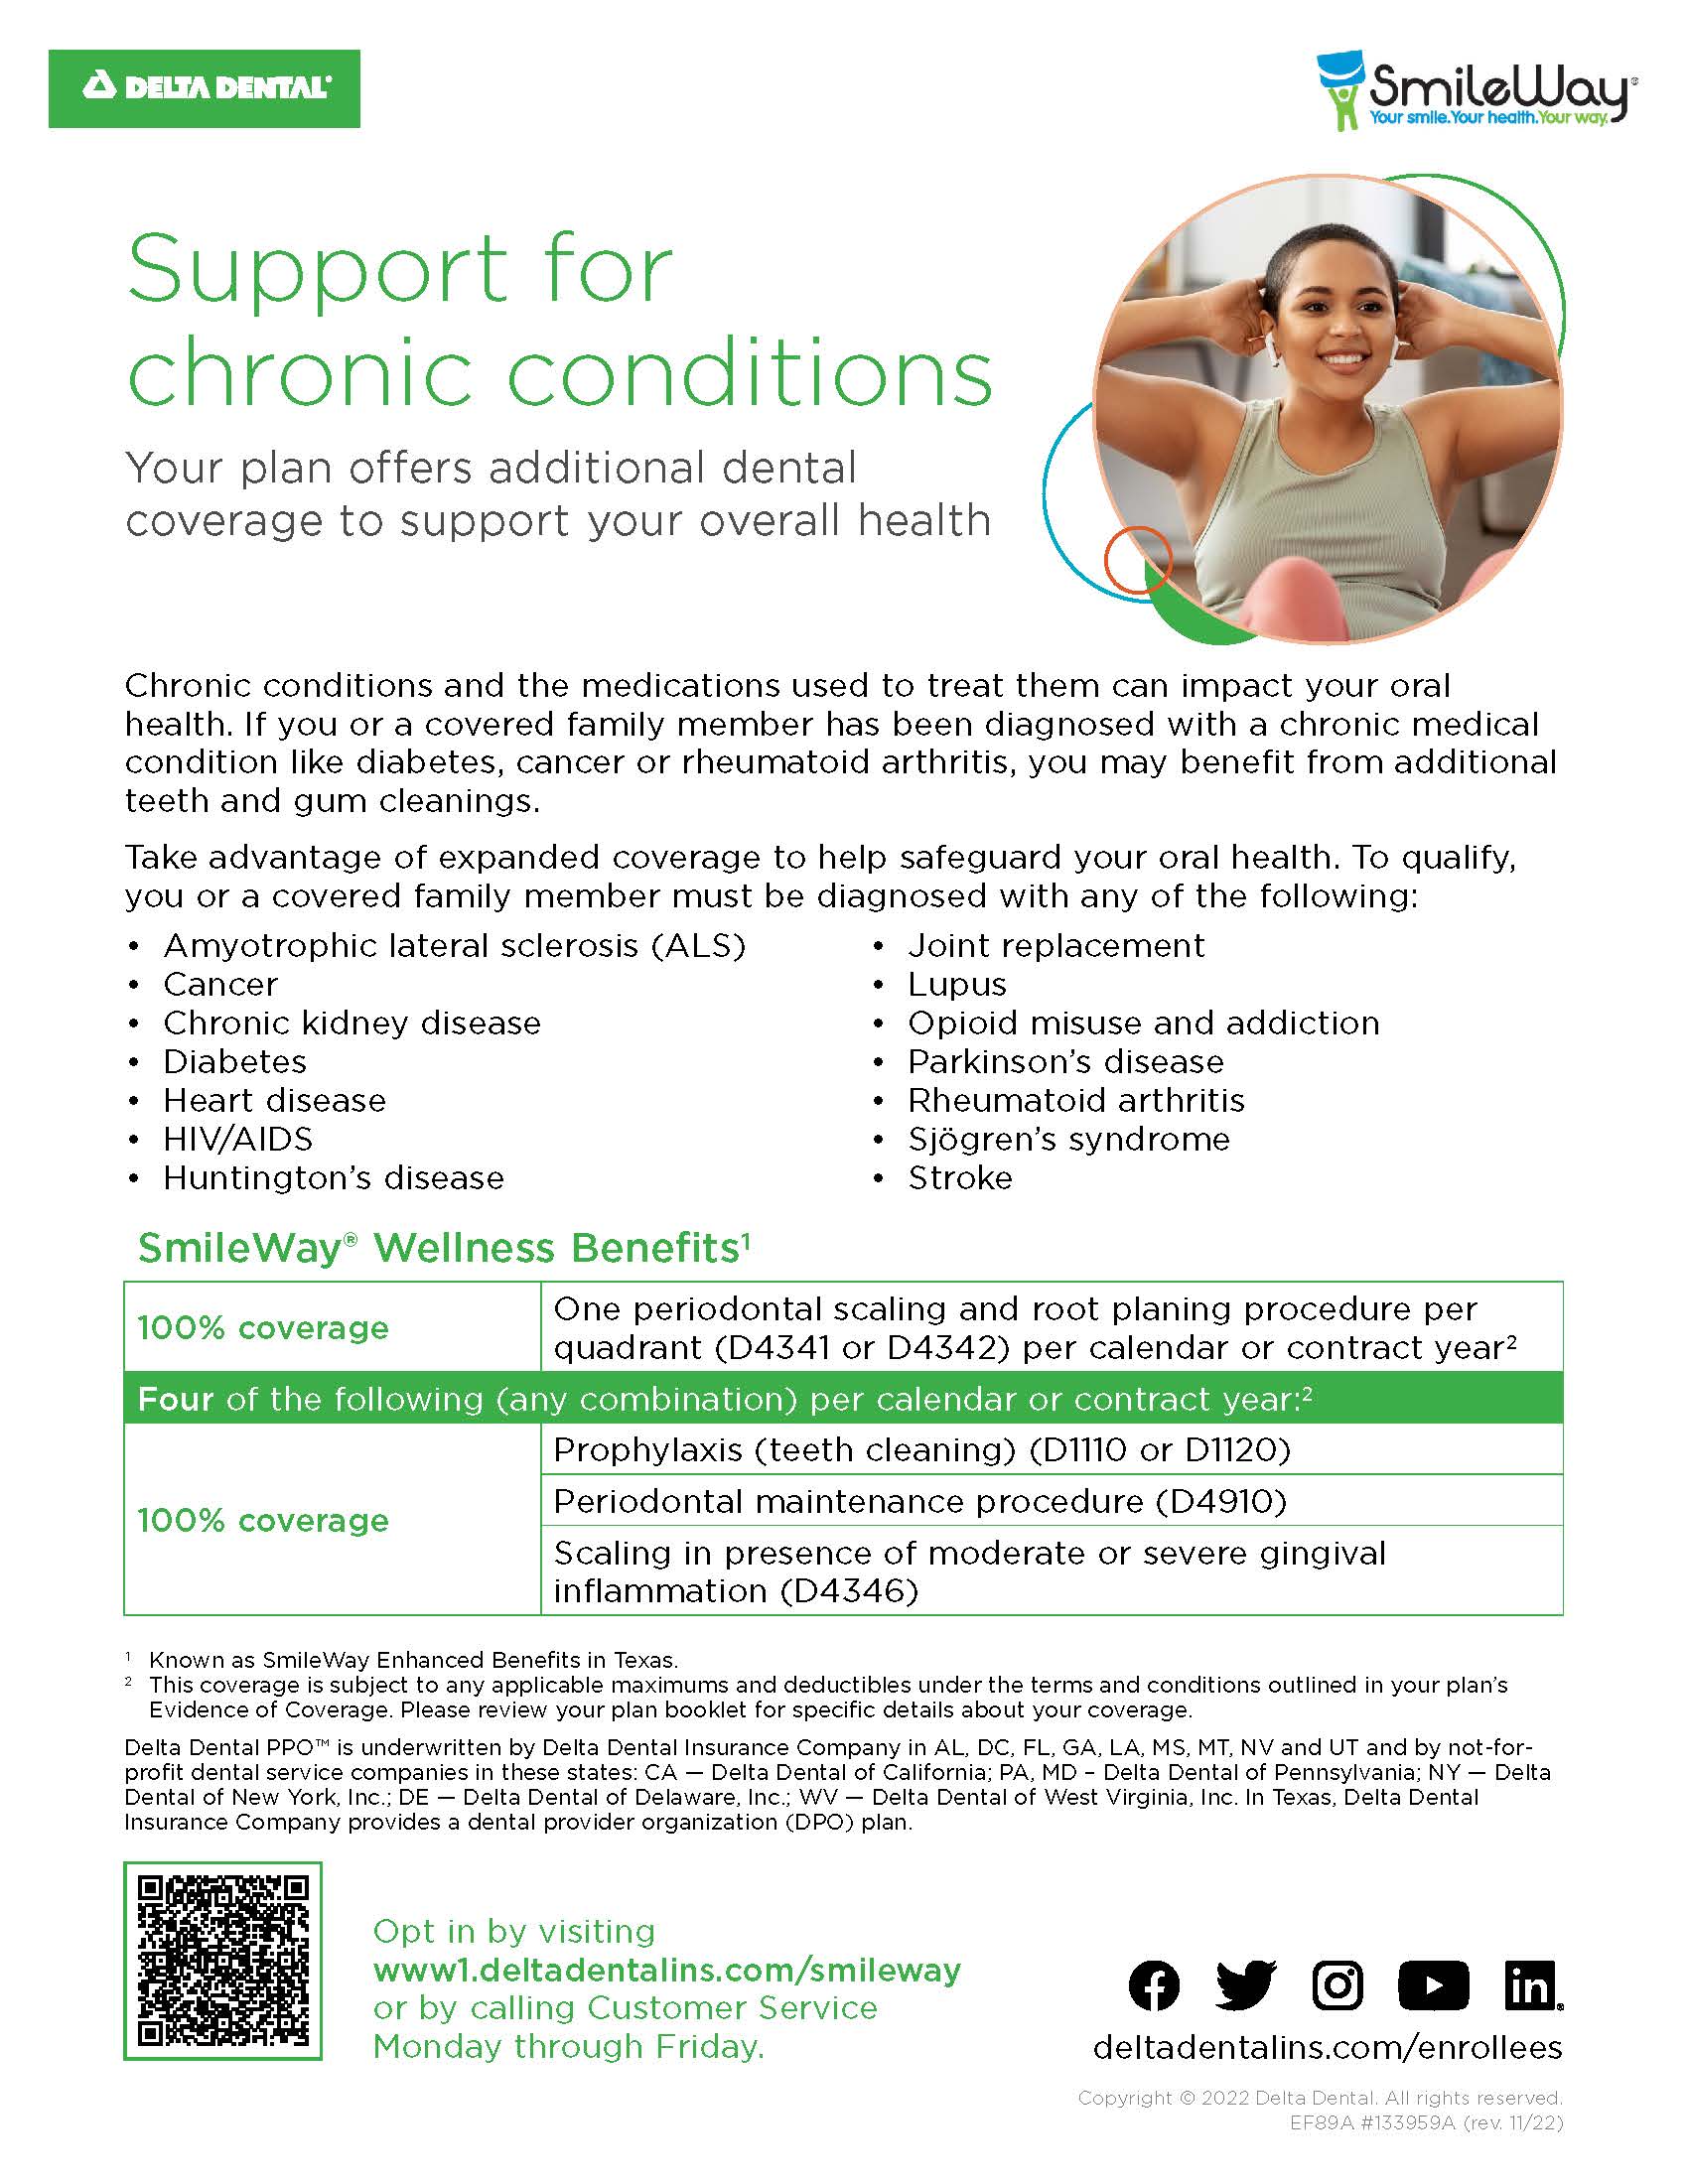 Delta Dental Support for Chronic Conditions cover sheet